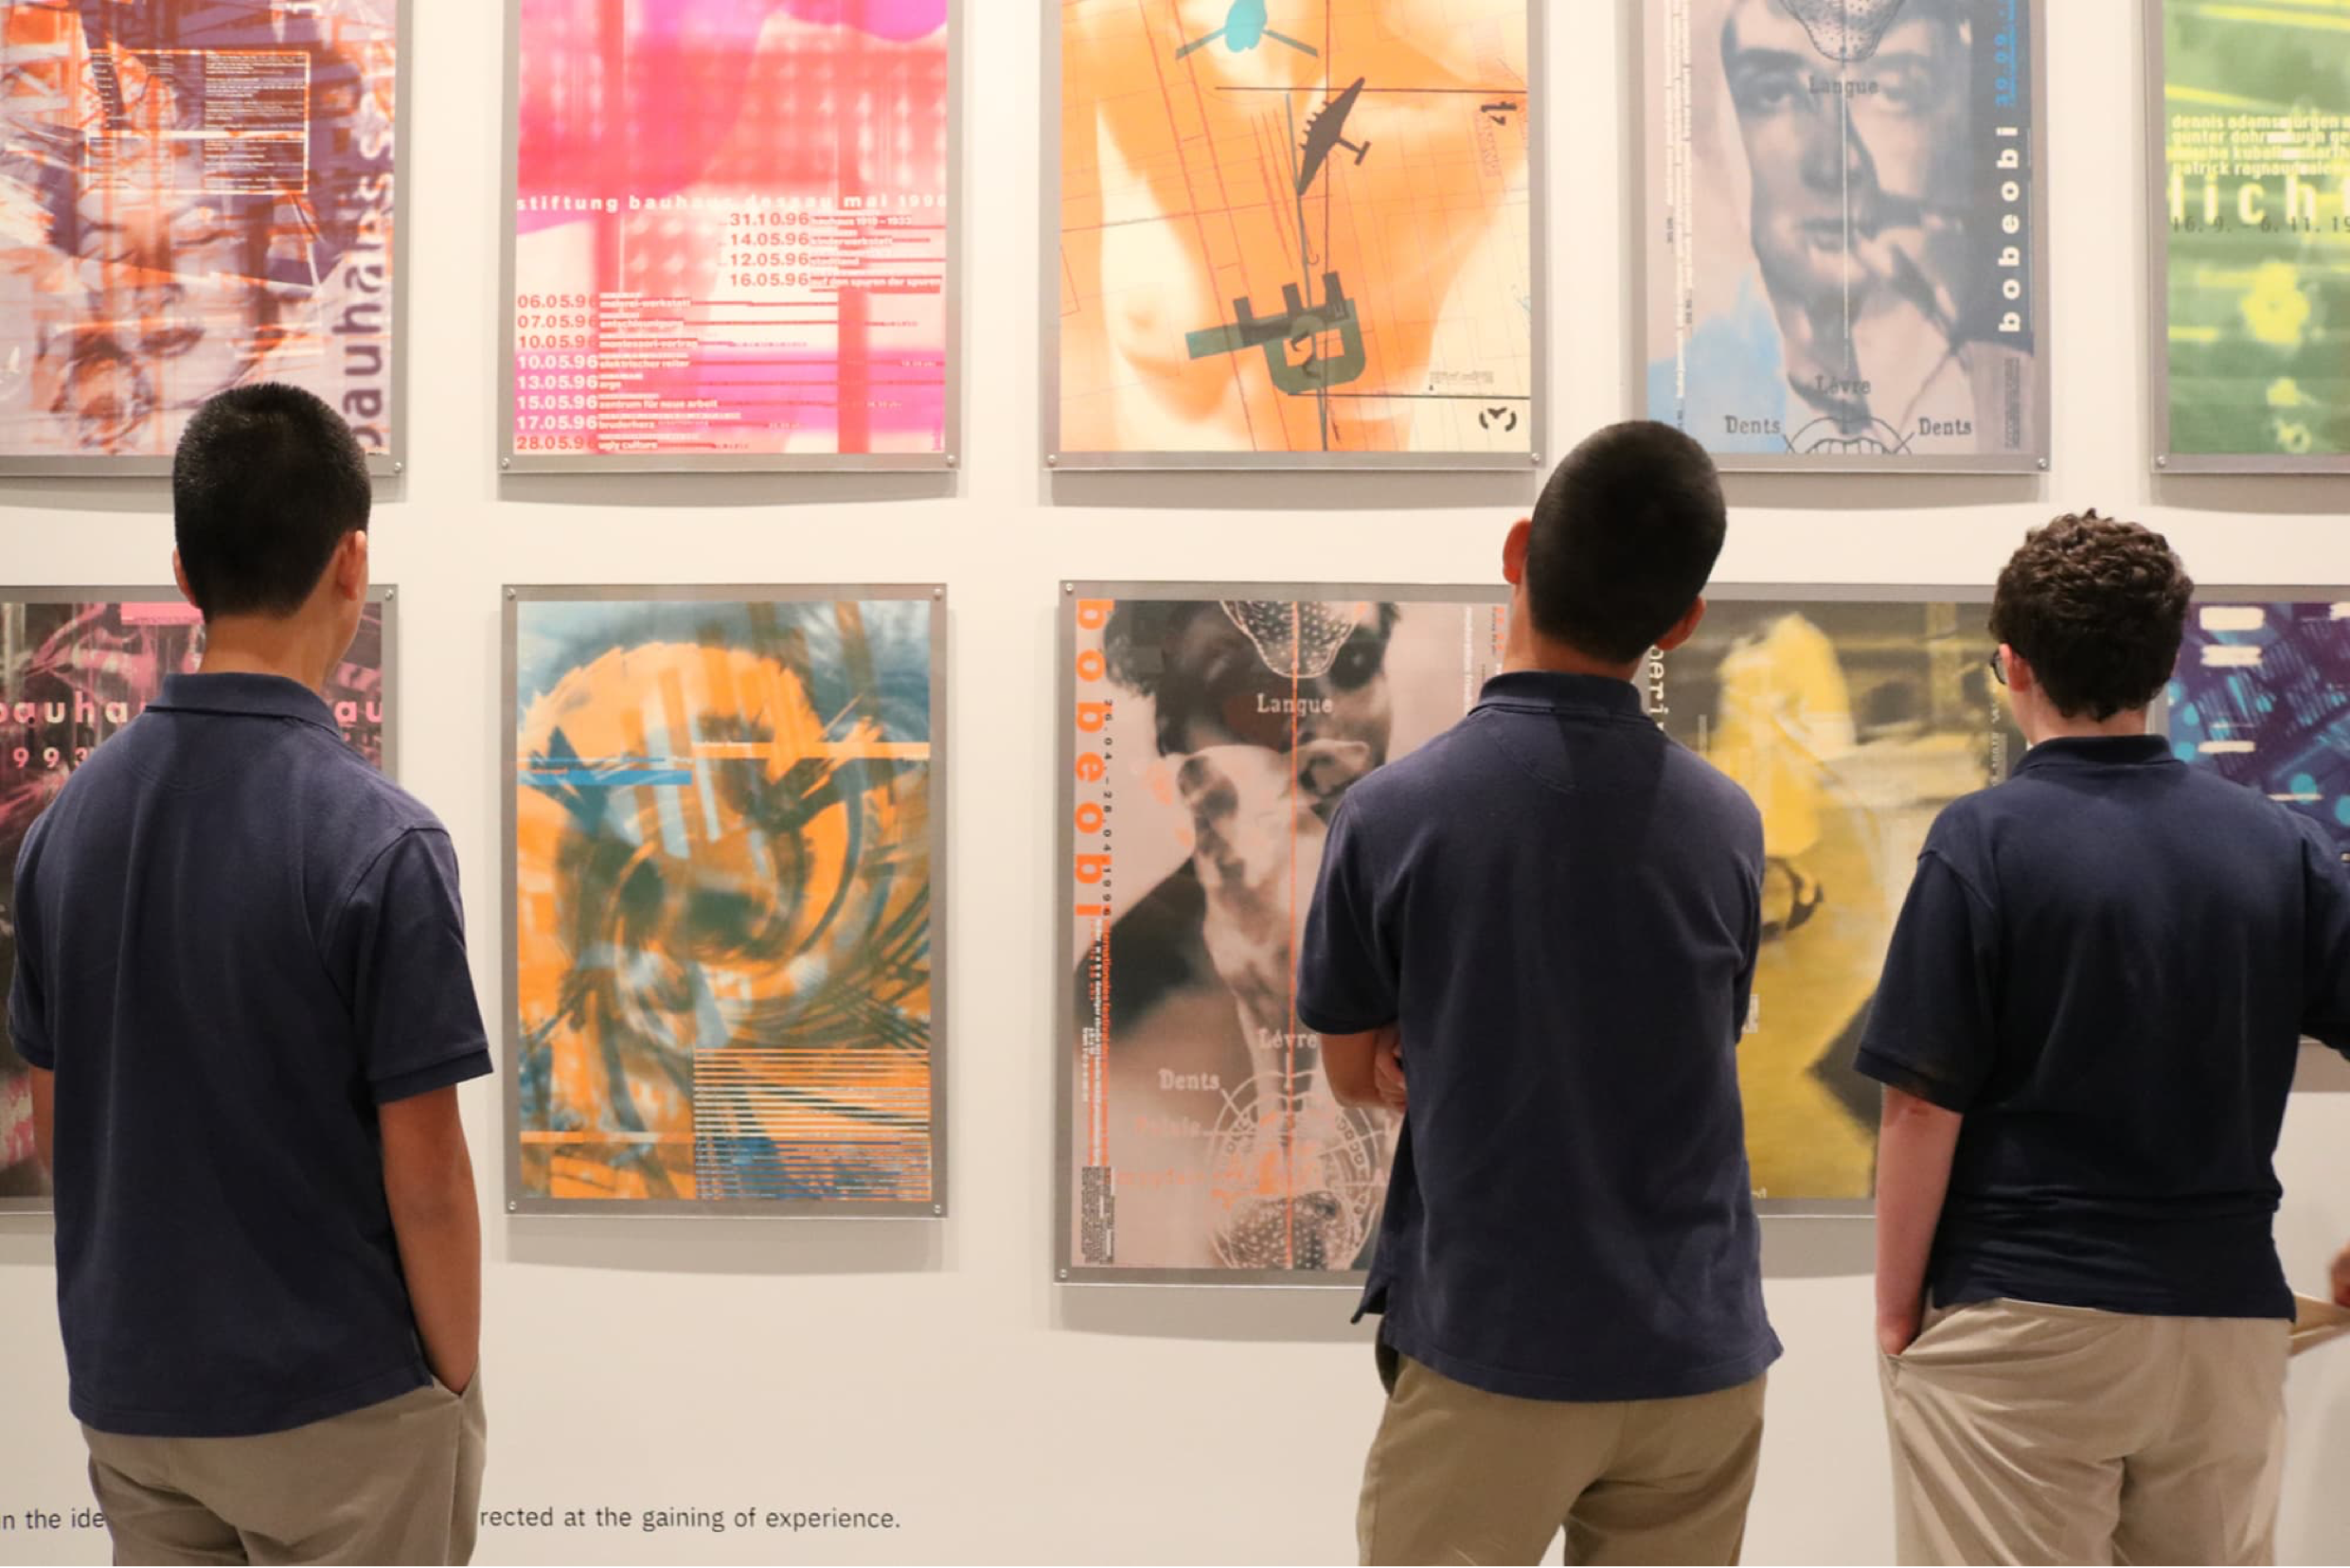 Three young people viewing ten muted toned Cyan in the 1990s exhibition framed posters on a white wall.